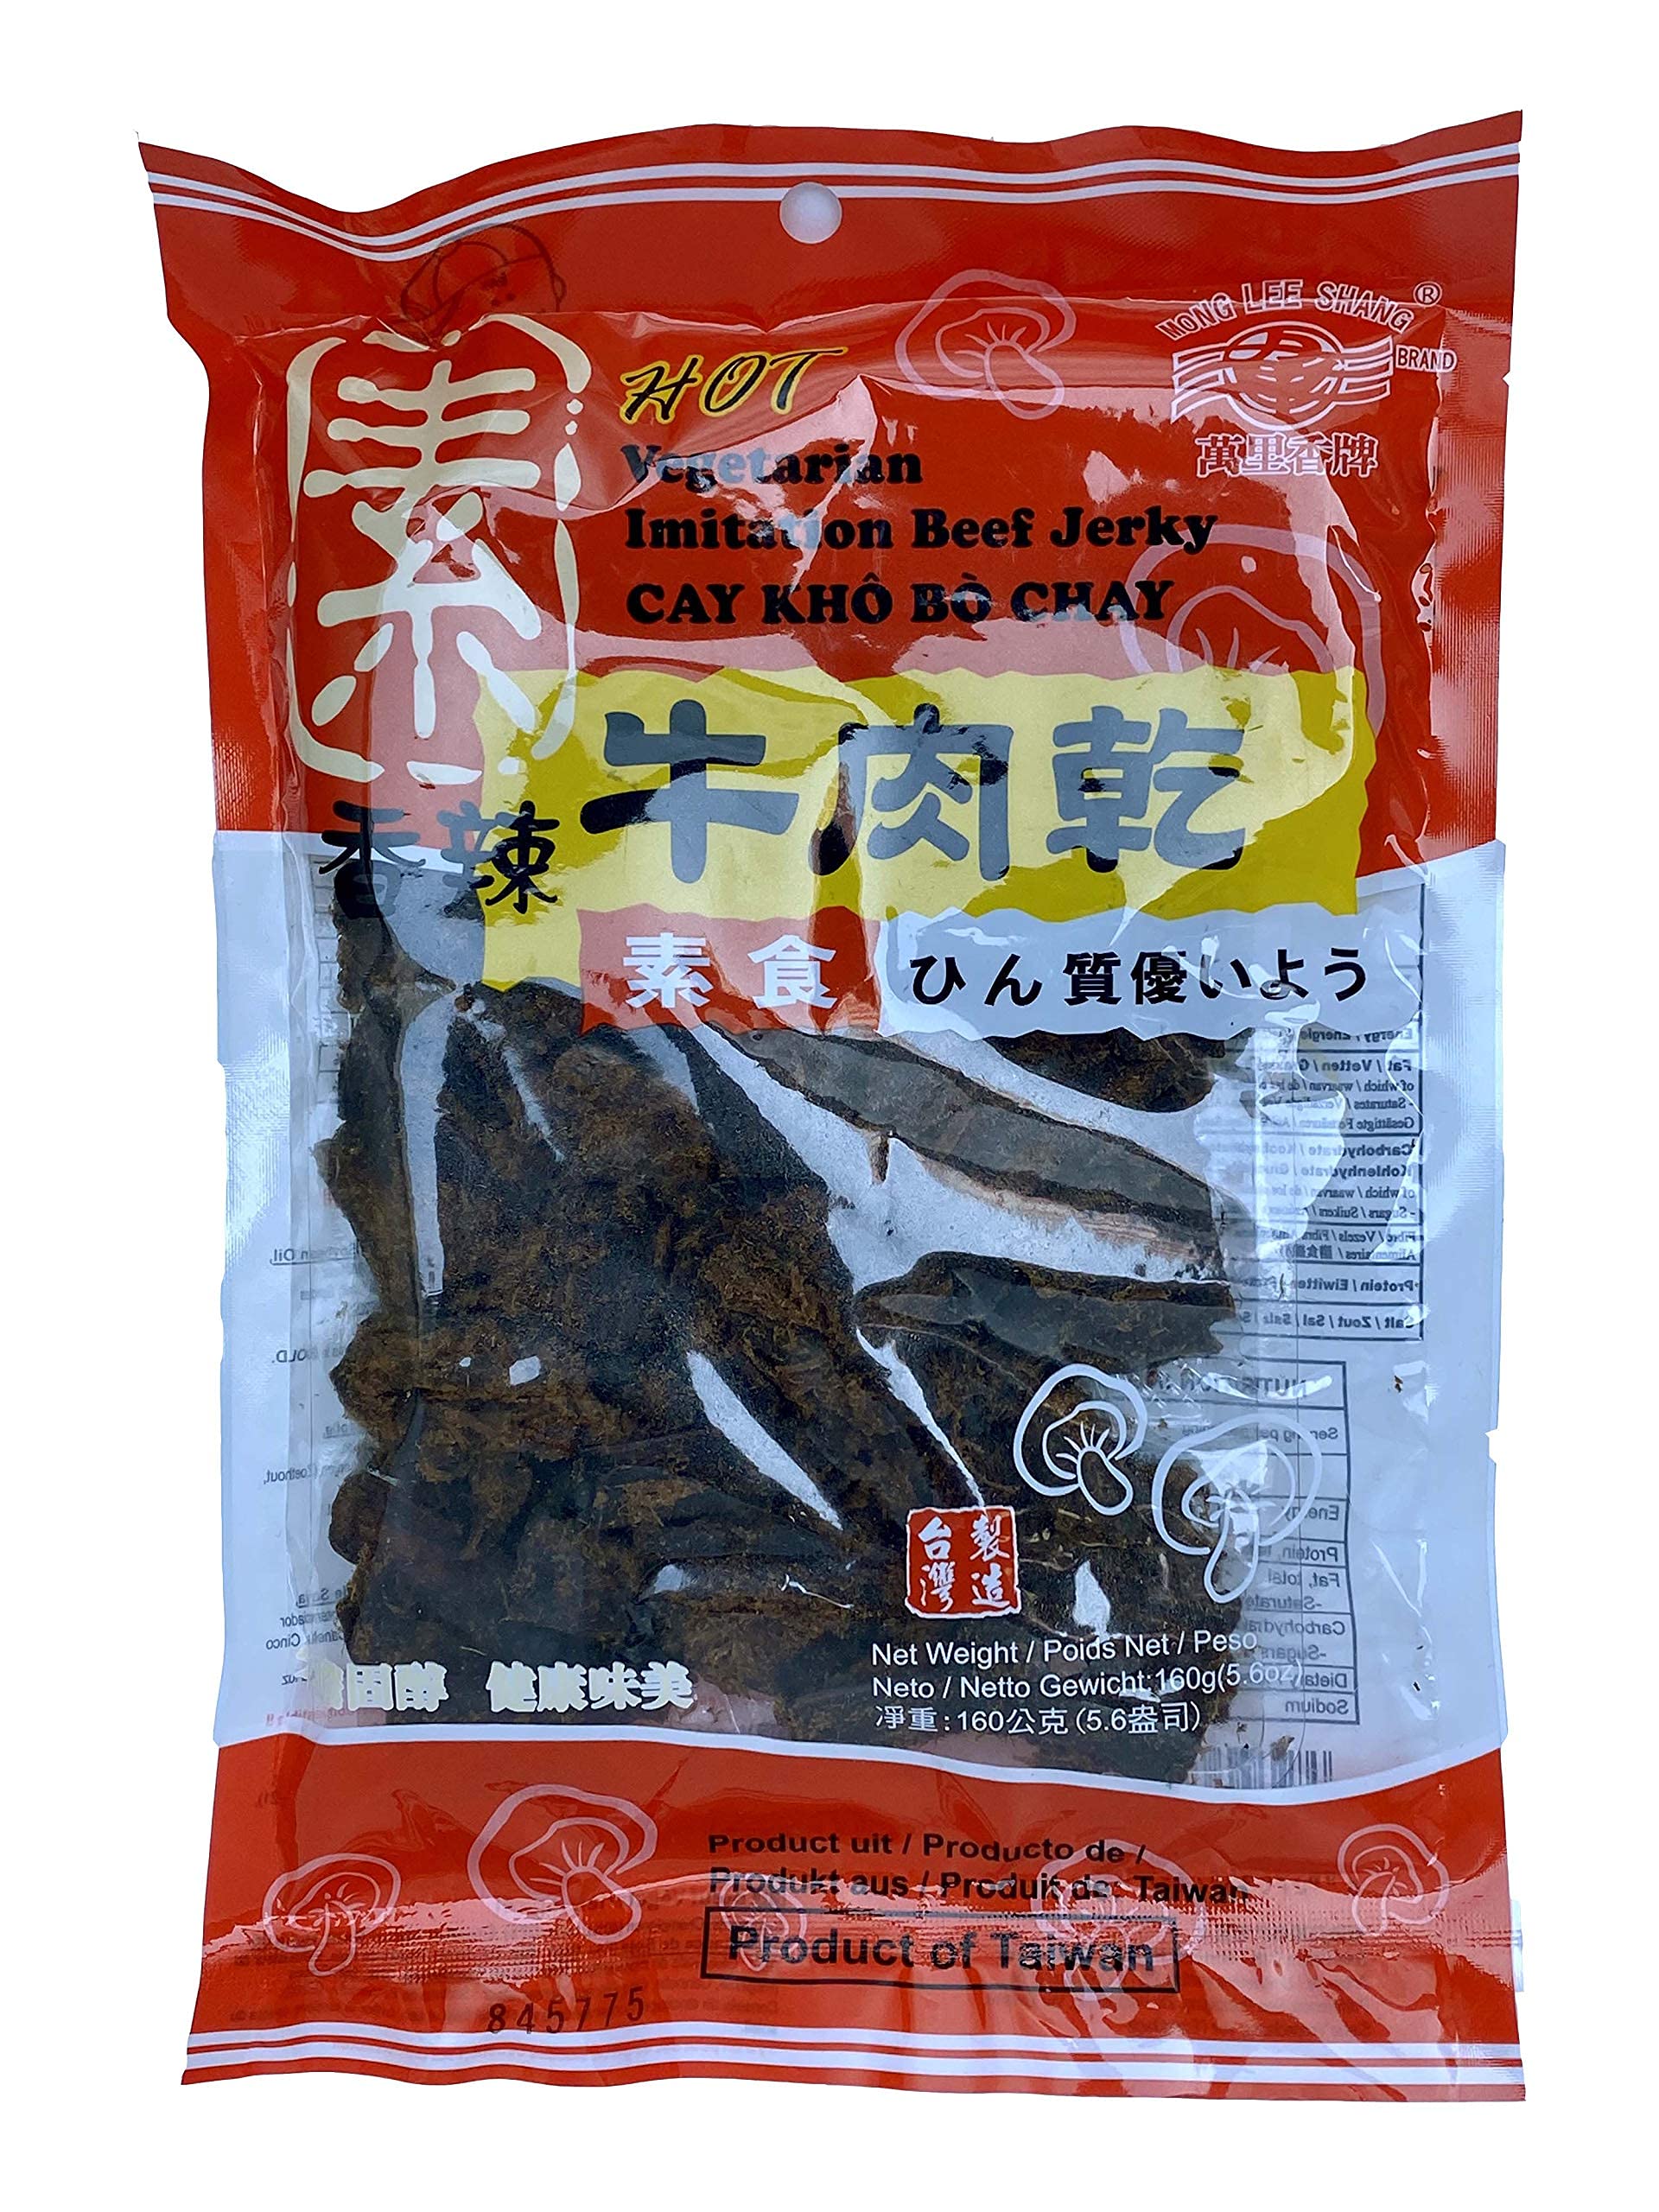 Mong Lee Shang Vegetarian Spicy Beef Jerky, Plant based Jerky, Meatless Jerky 160g Avialable in Original and Spicy Flavor